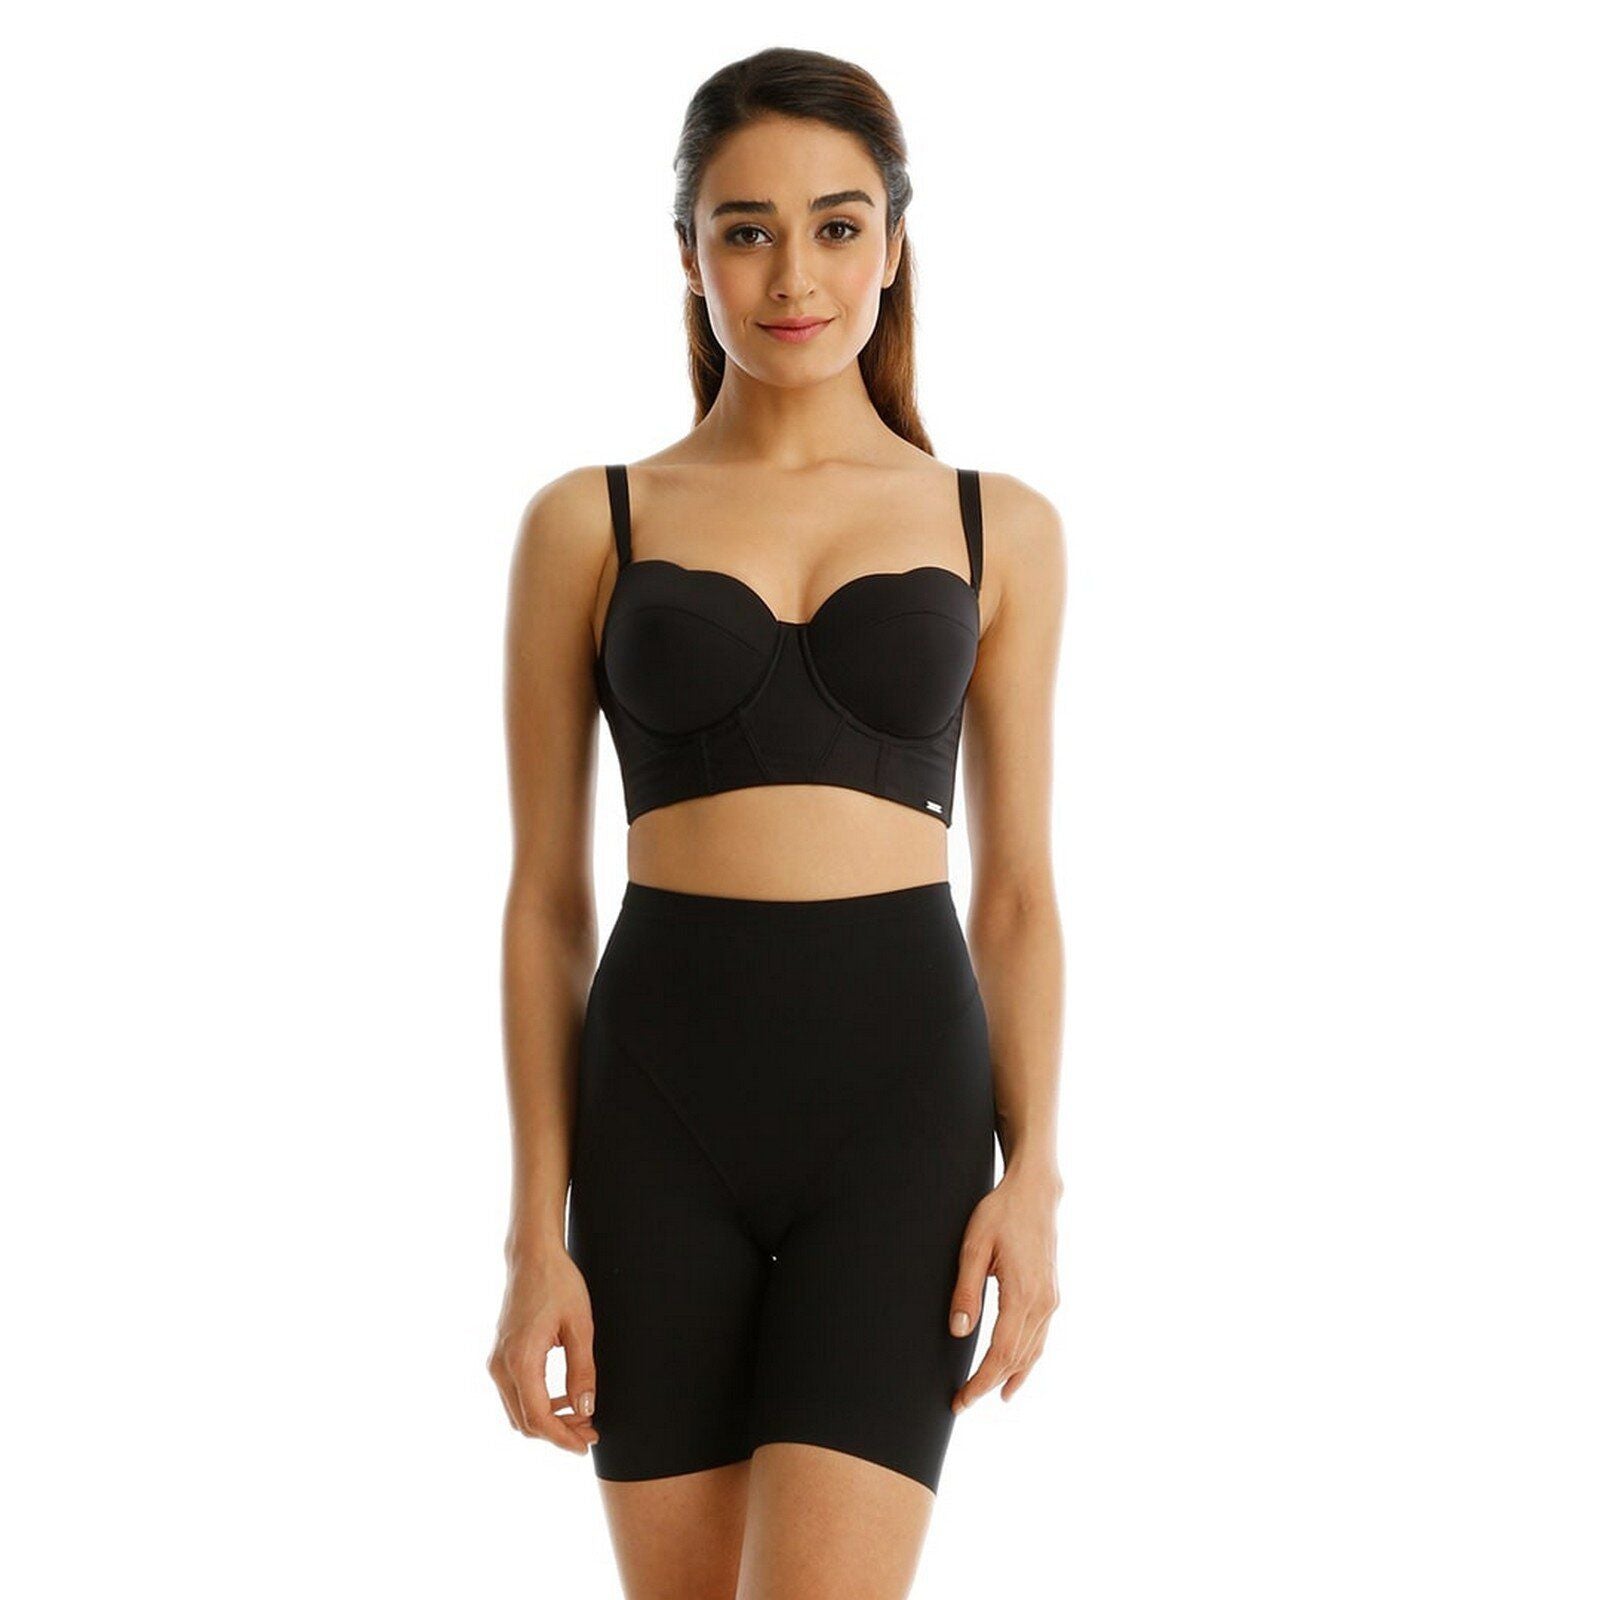 XIXILI 2070 Super Cropped Bustier – WOW BODY STORE